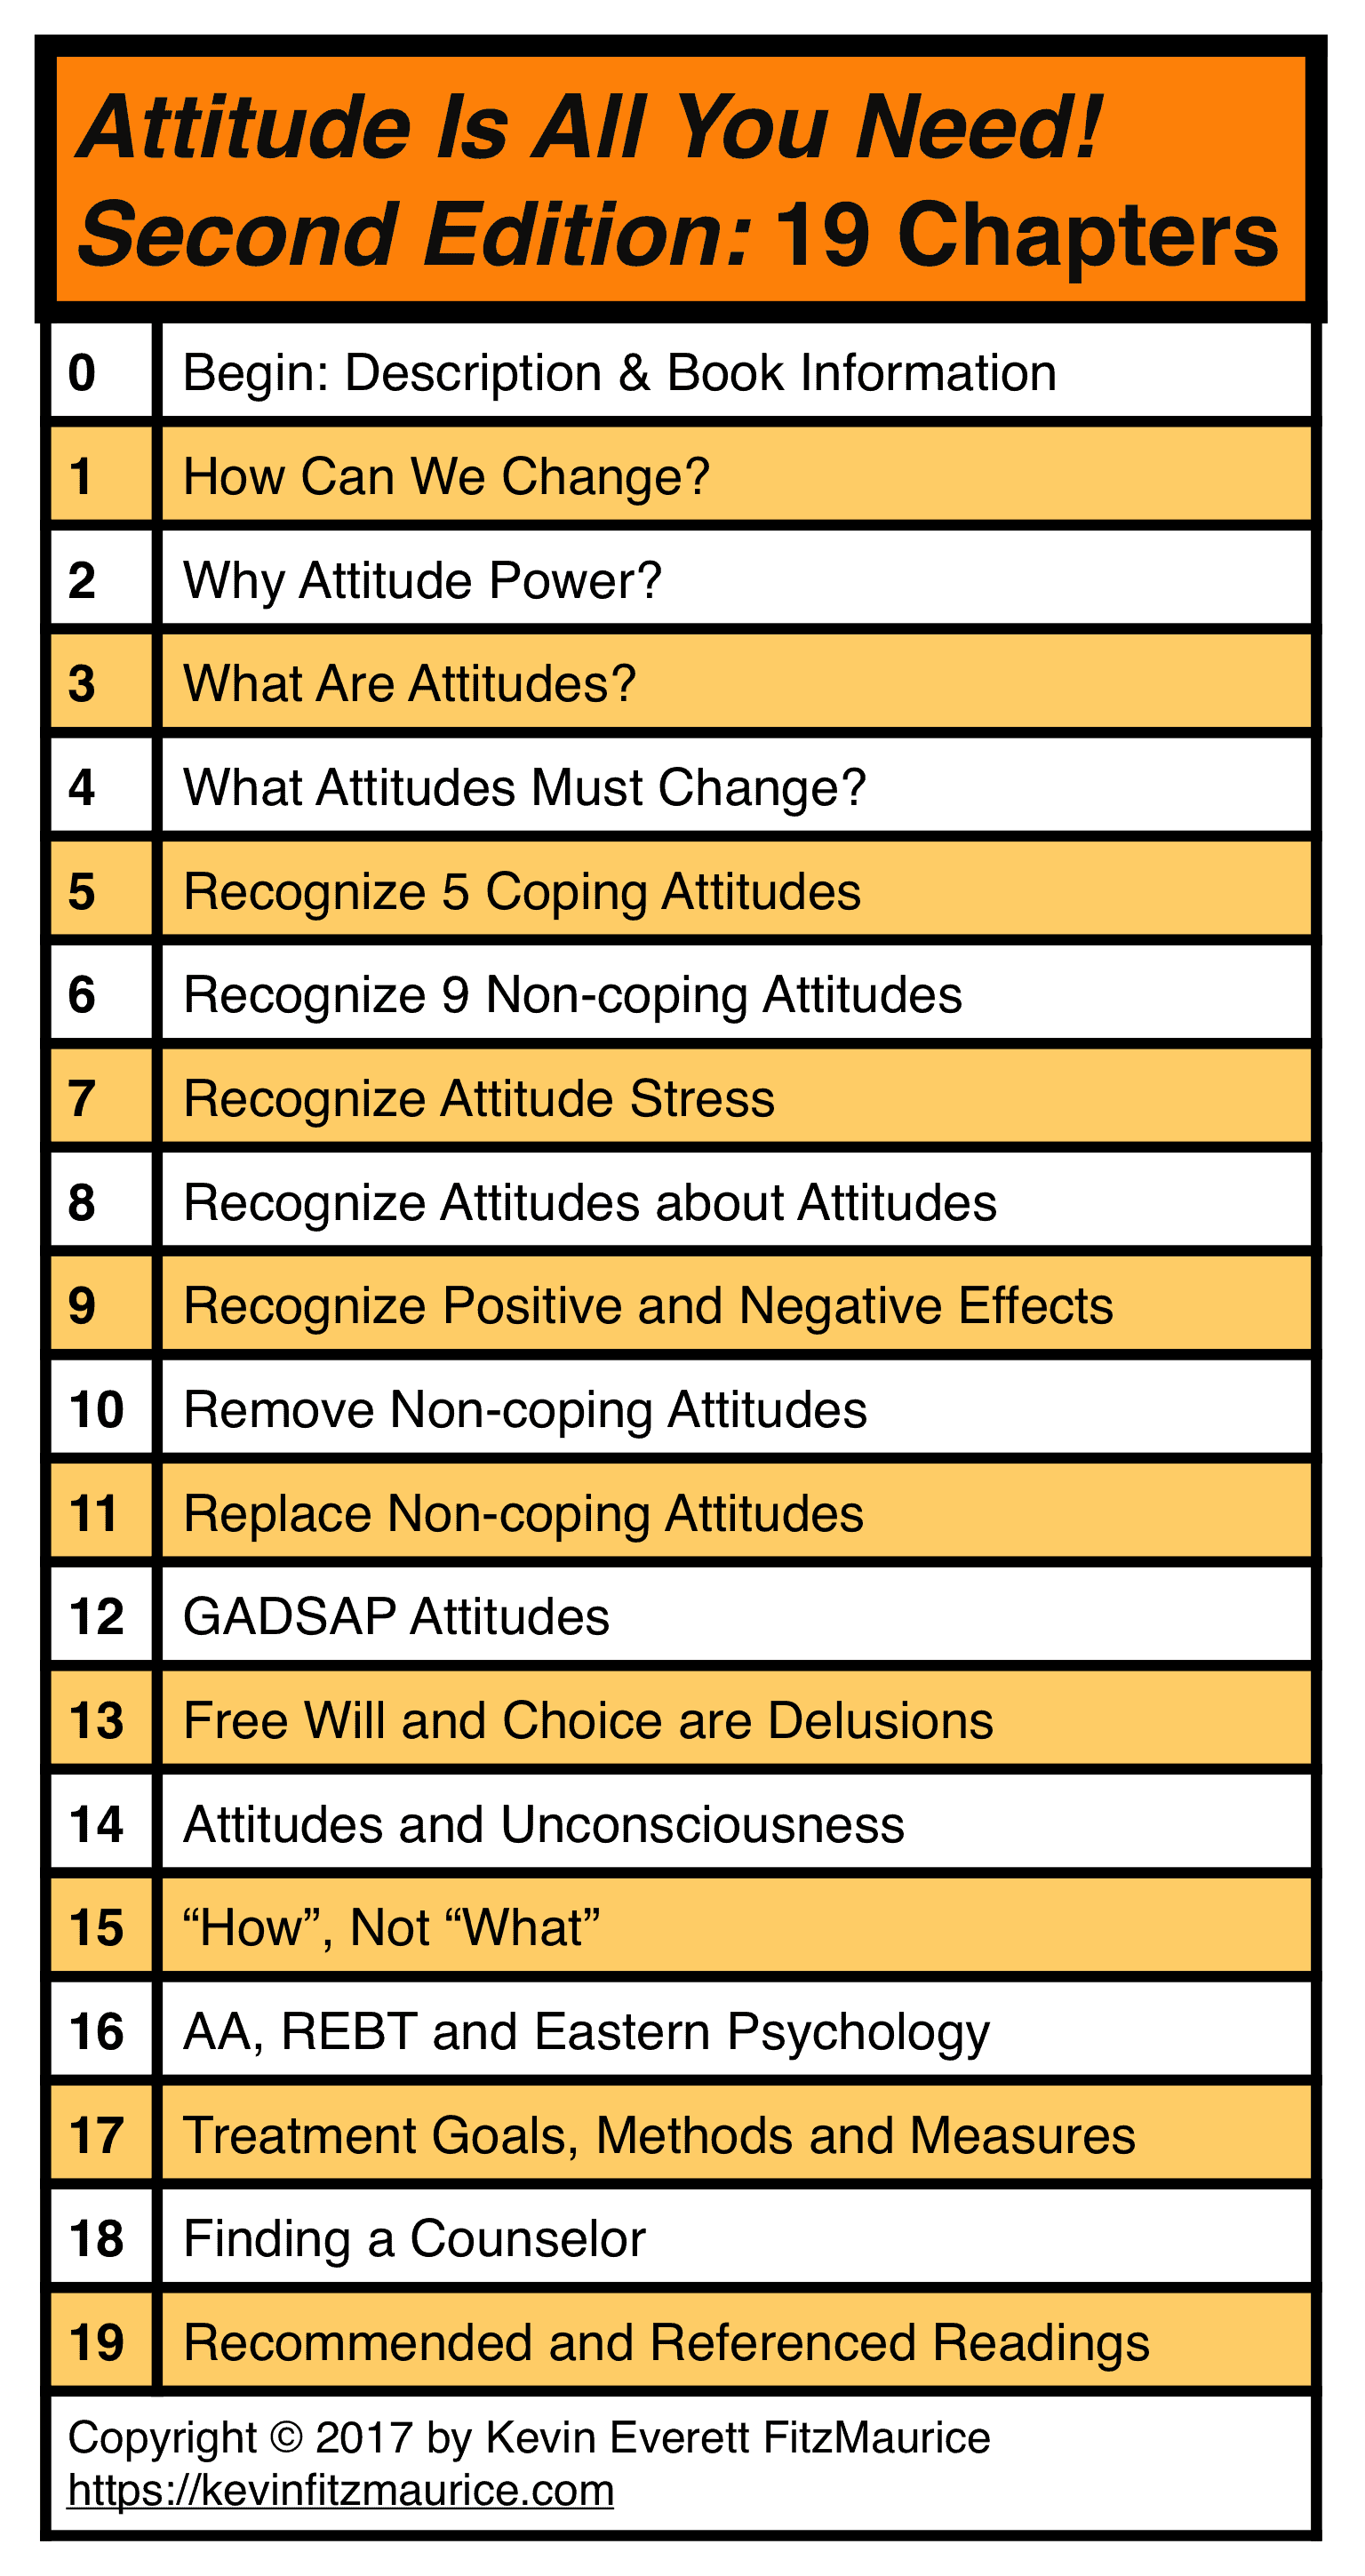 Attitude Is All You Need Chapter List